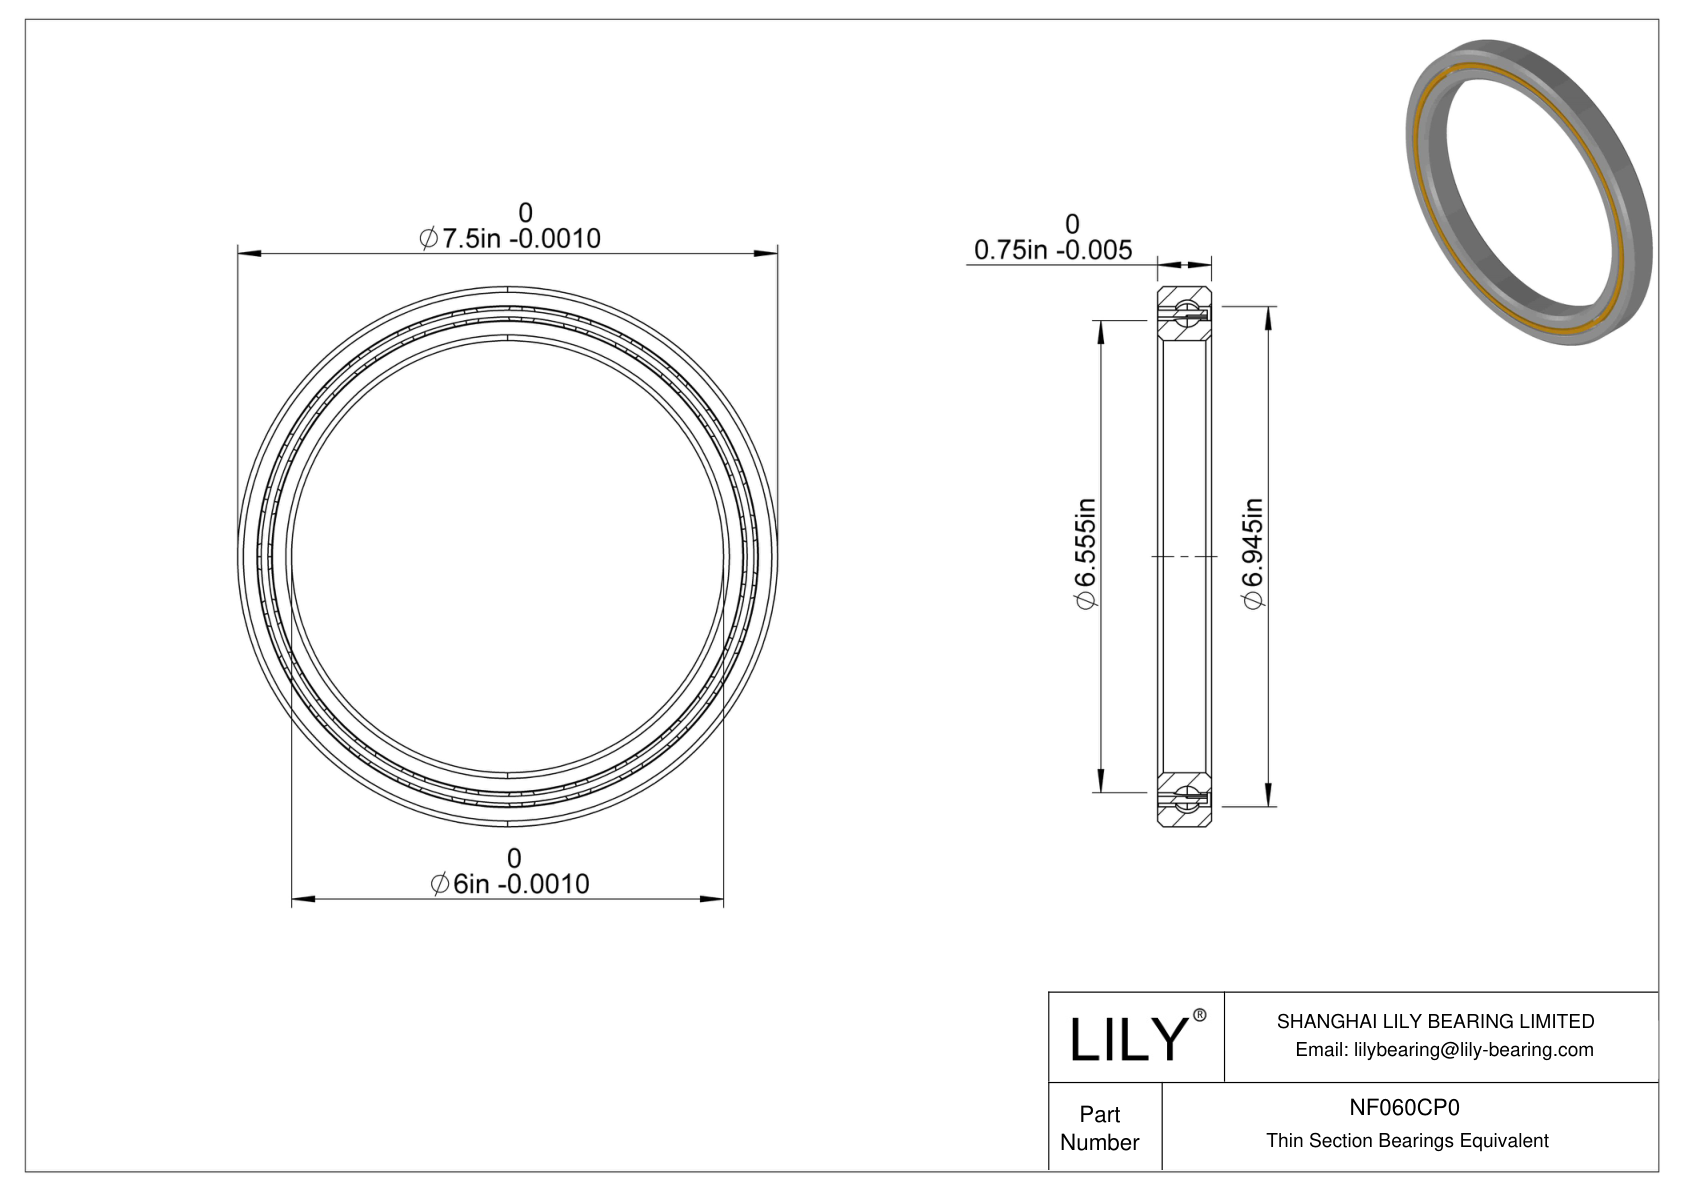 NF060CP0 Constant Section (CS) Bearings cad drawing